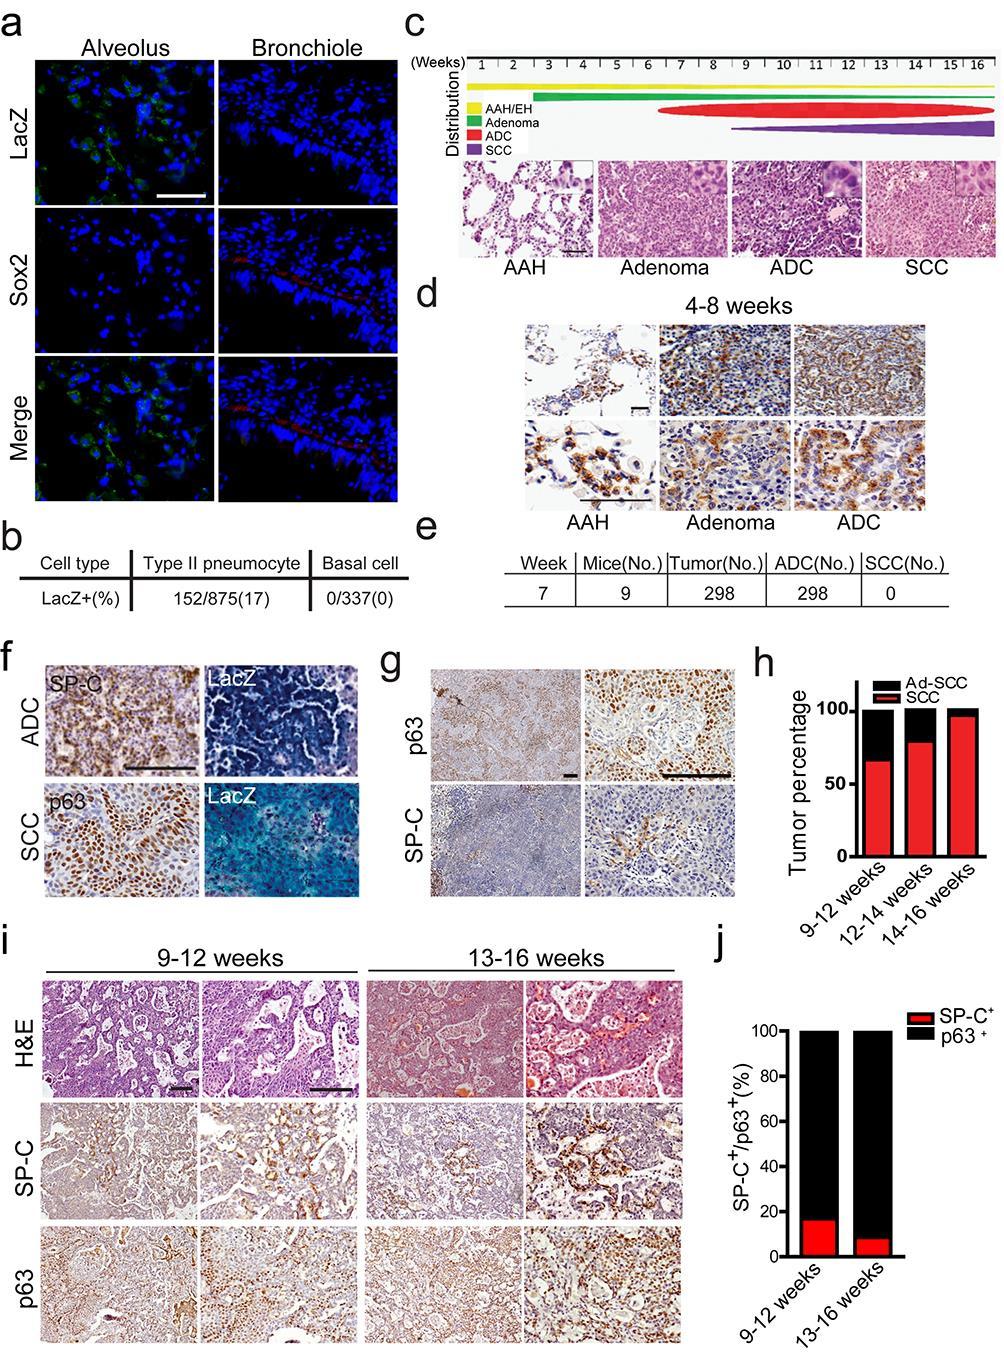 Supplementary Figure 2. Type II pneumocyte lineage-derived lung ADC with Lkb1 deficiency transdifferentiates into SCC.